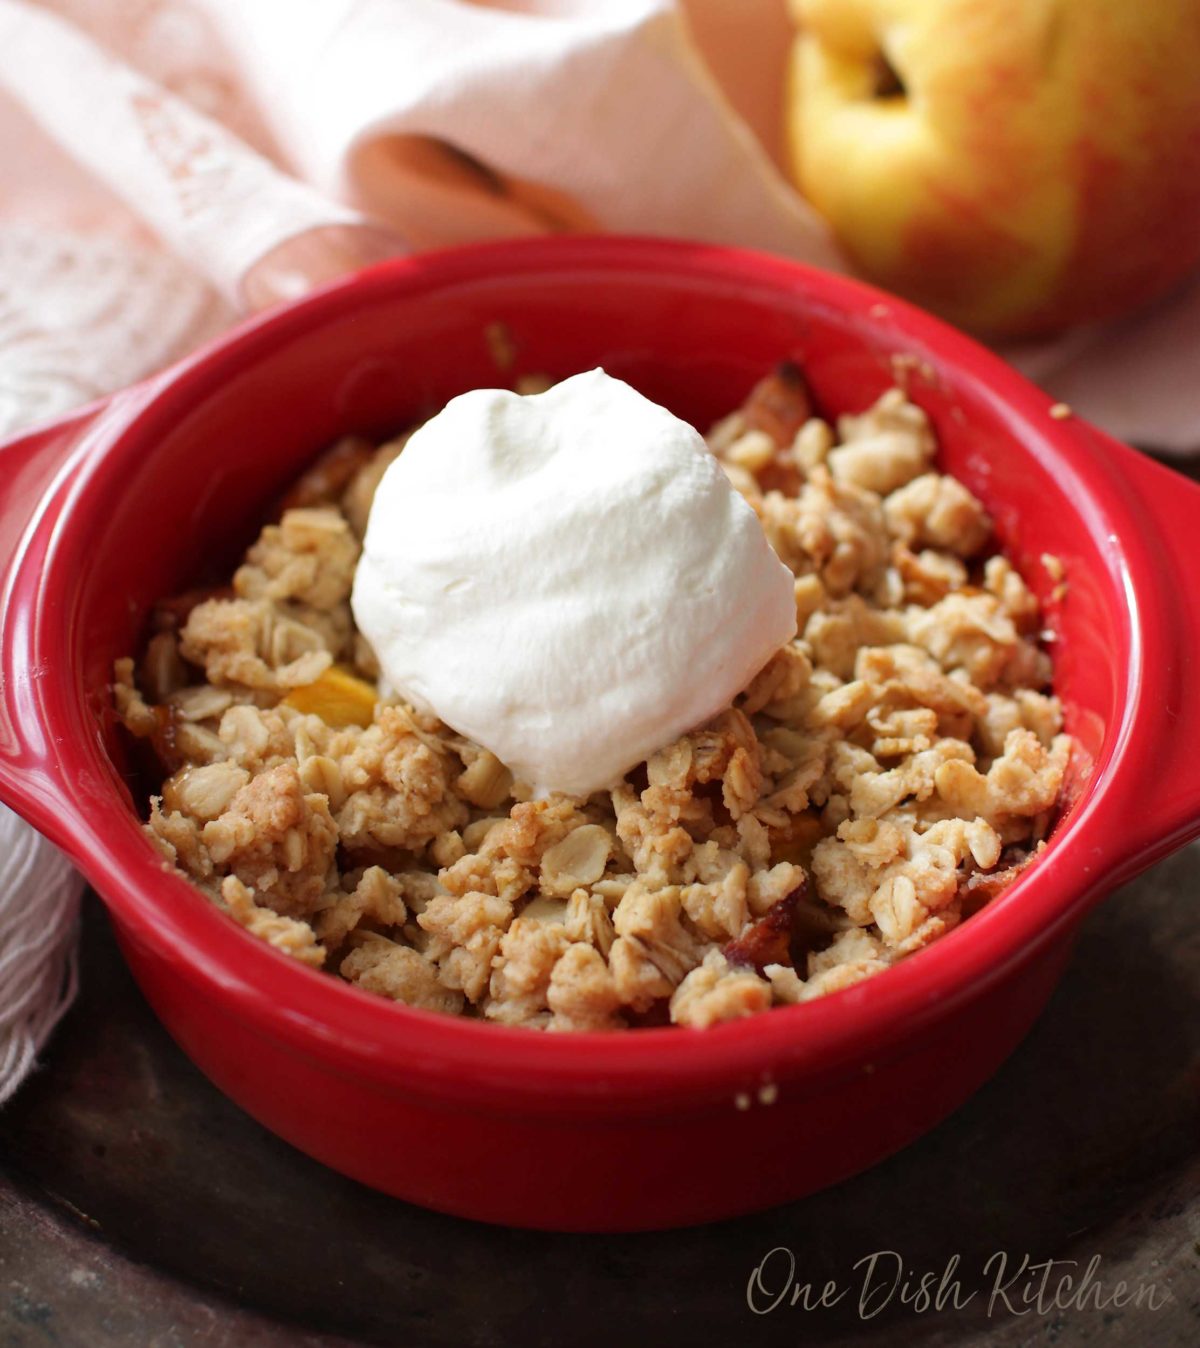 a peach crisp topped with whipped cream in a red bowl.